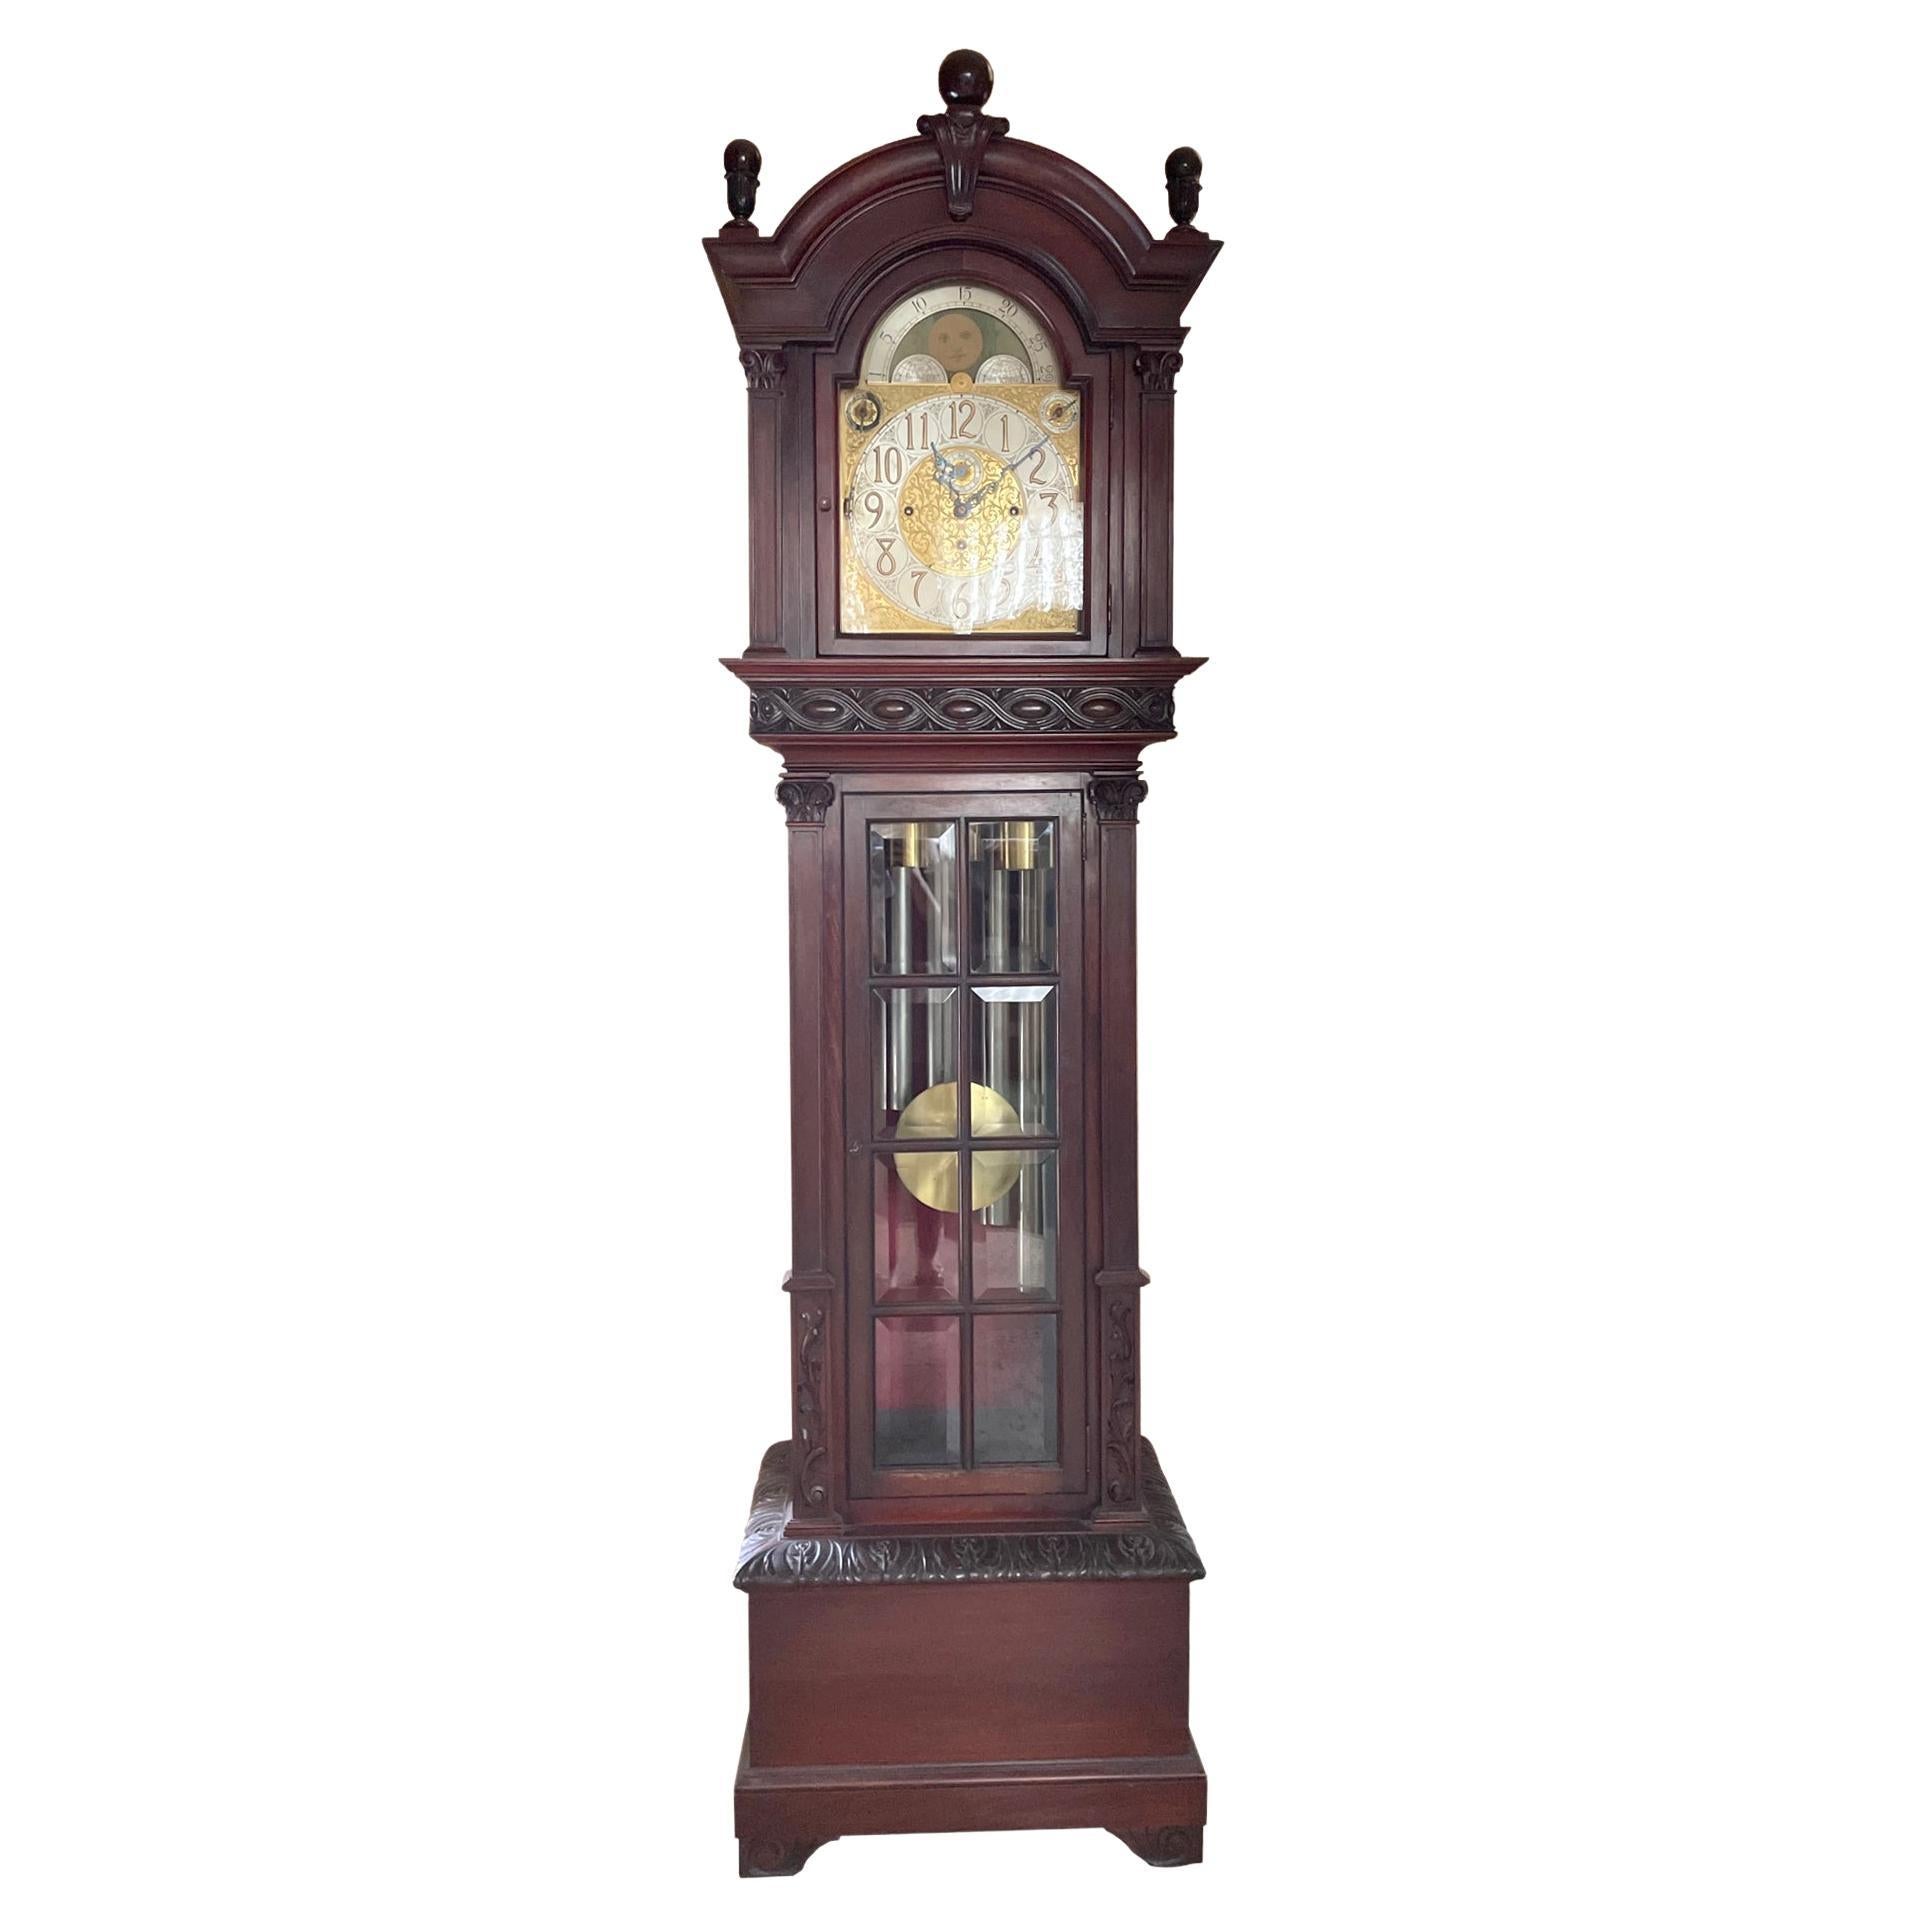 A circa 1916, Colonial Manufacturing Co., 9-tube Grandfather clock with highly decorative hand-carved Honduras Mahogany tall case and Herschede movement. Colonial was located in Zeeland, MI and produced clocks from 1906 until 1983 when the company